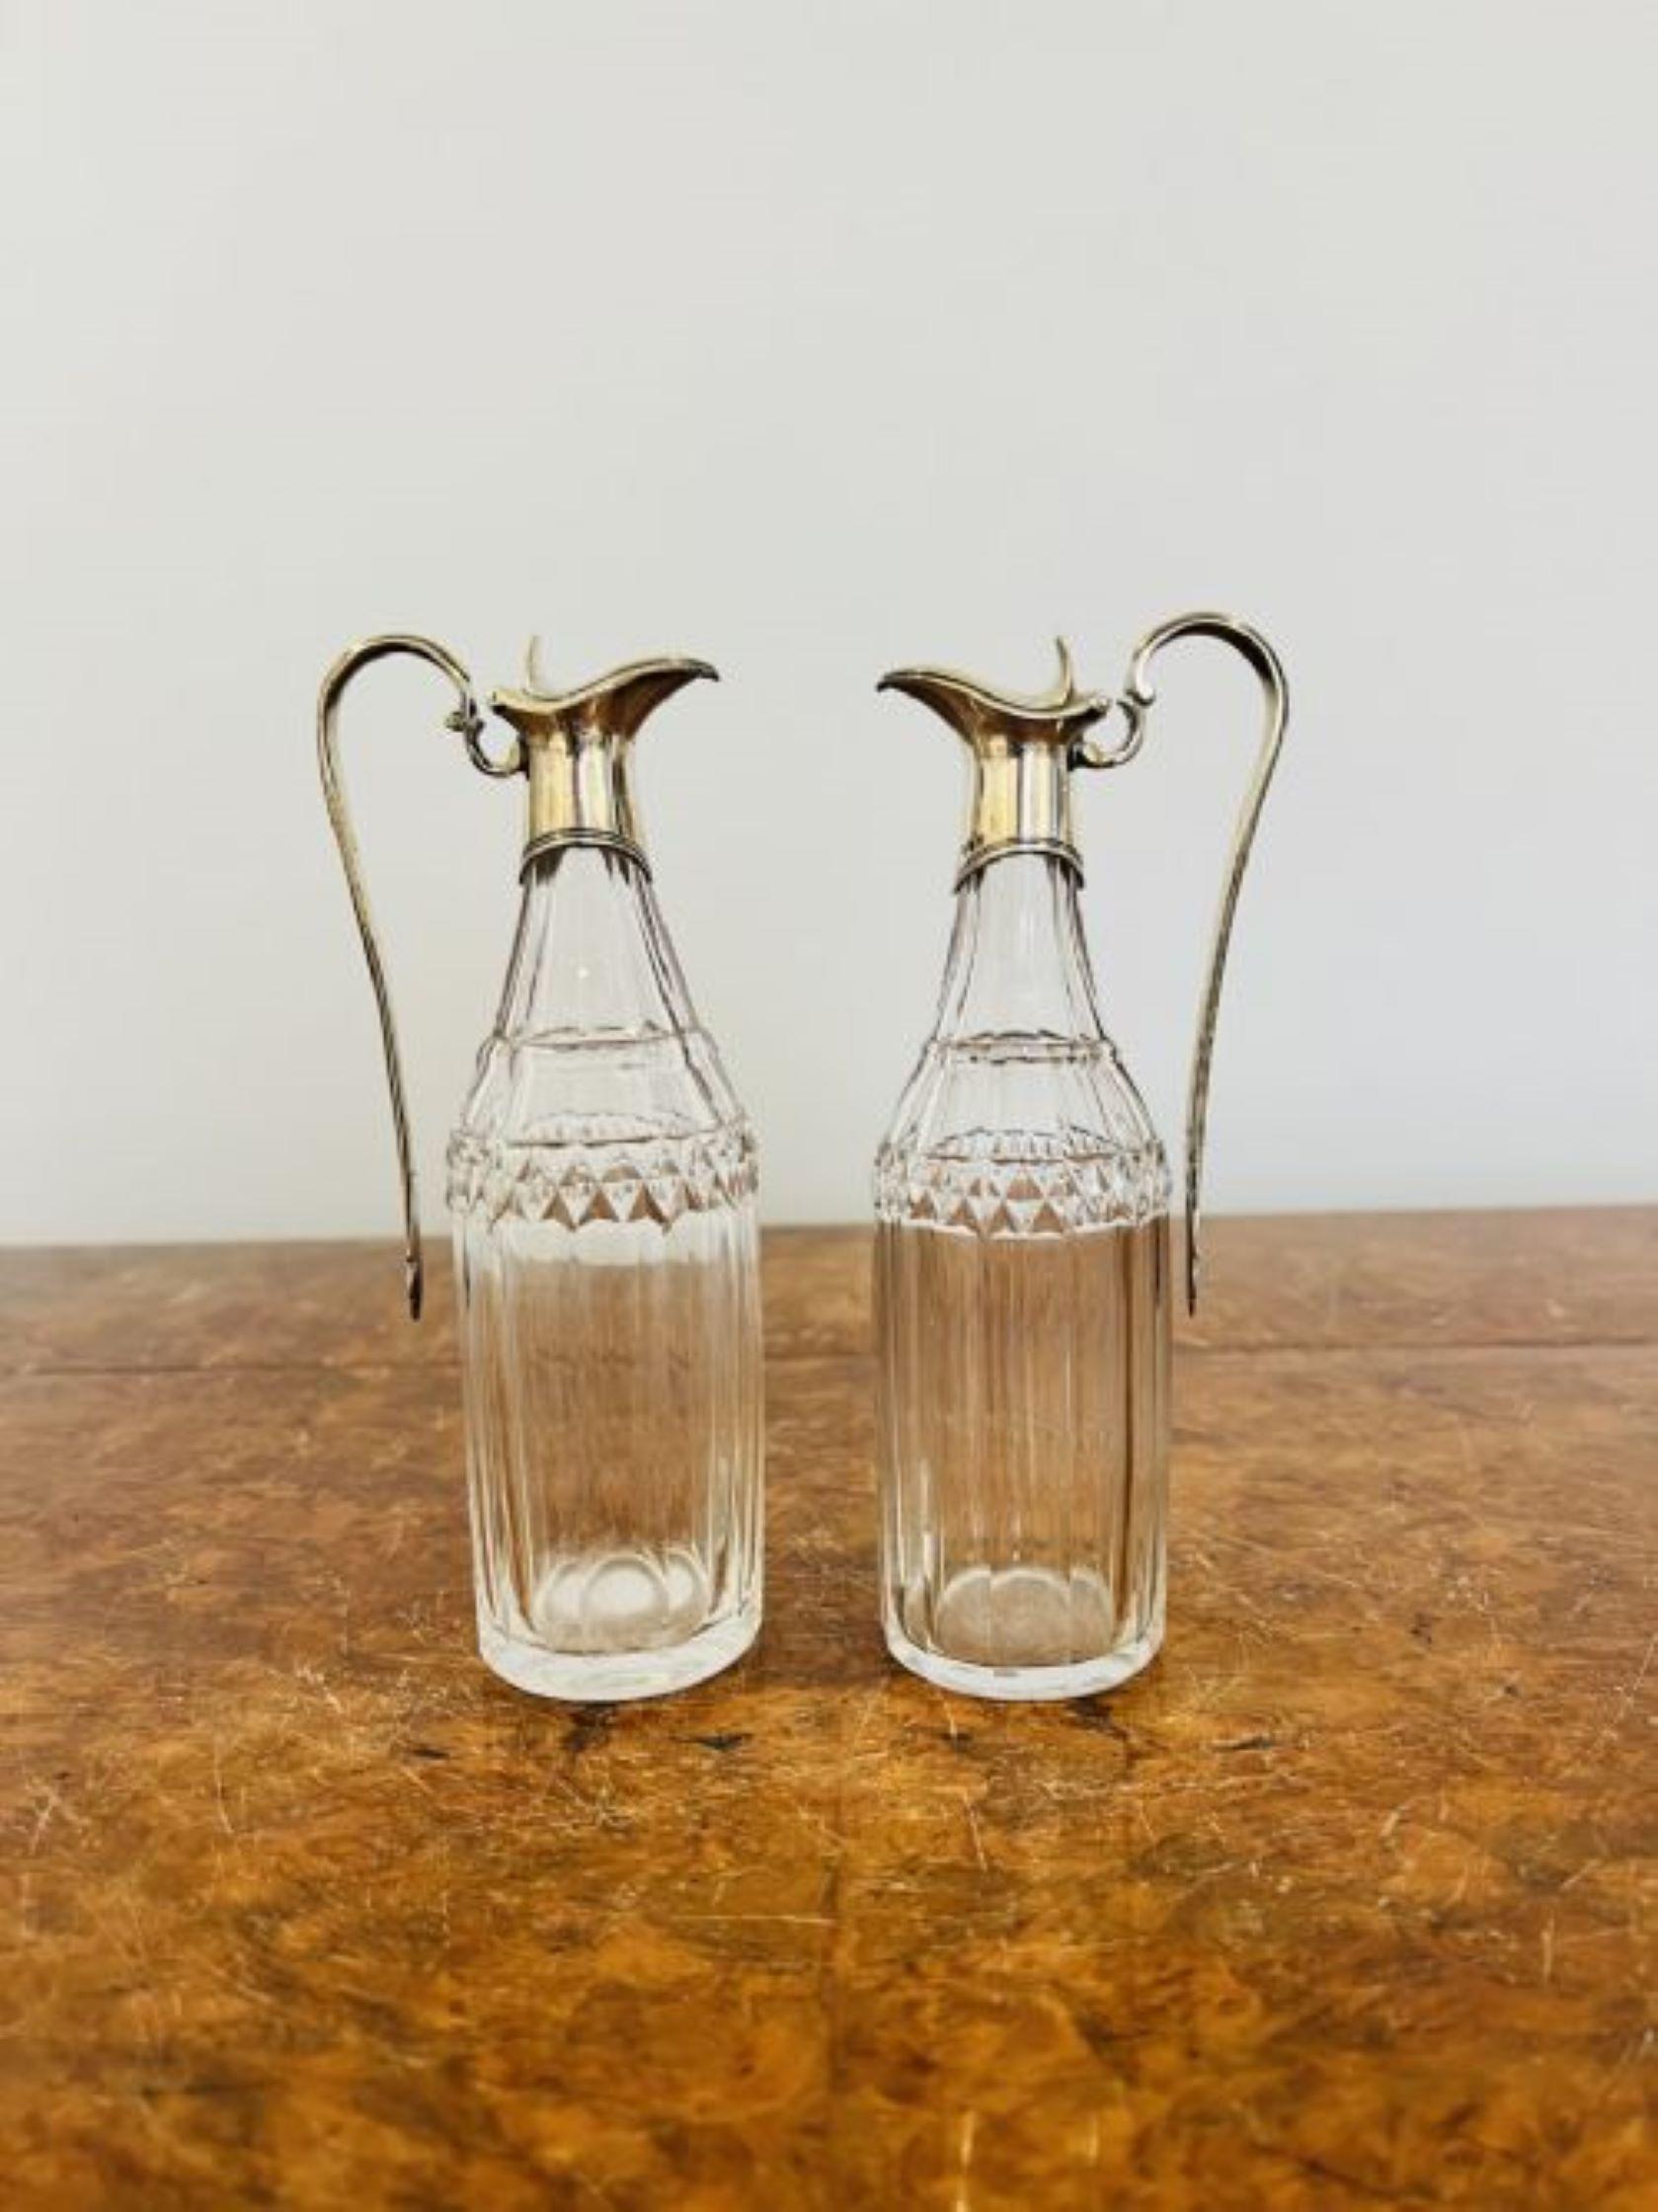 Fine pair of George III hallmarked silver and glass oil and vinegar bottles having a quality hallmarked George III silver tops with shaped handles and lids, original fine cut glass oil and vinegar bottles by Robert and David Hennell 
D. 1795